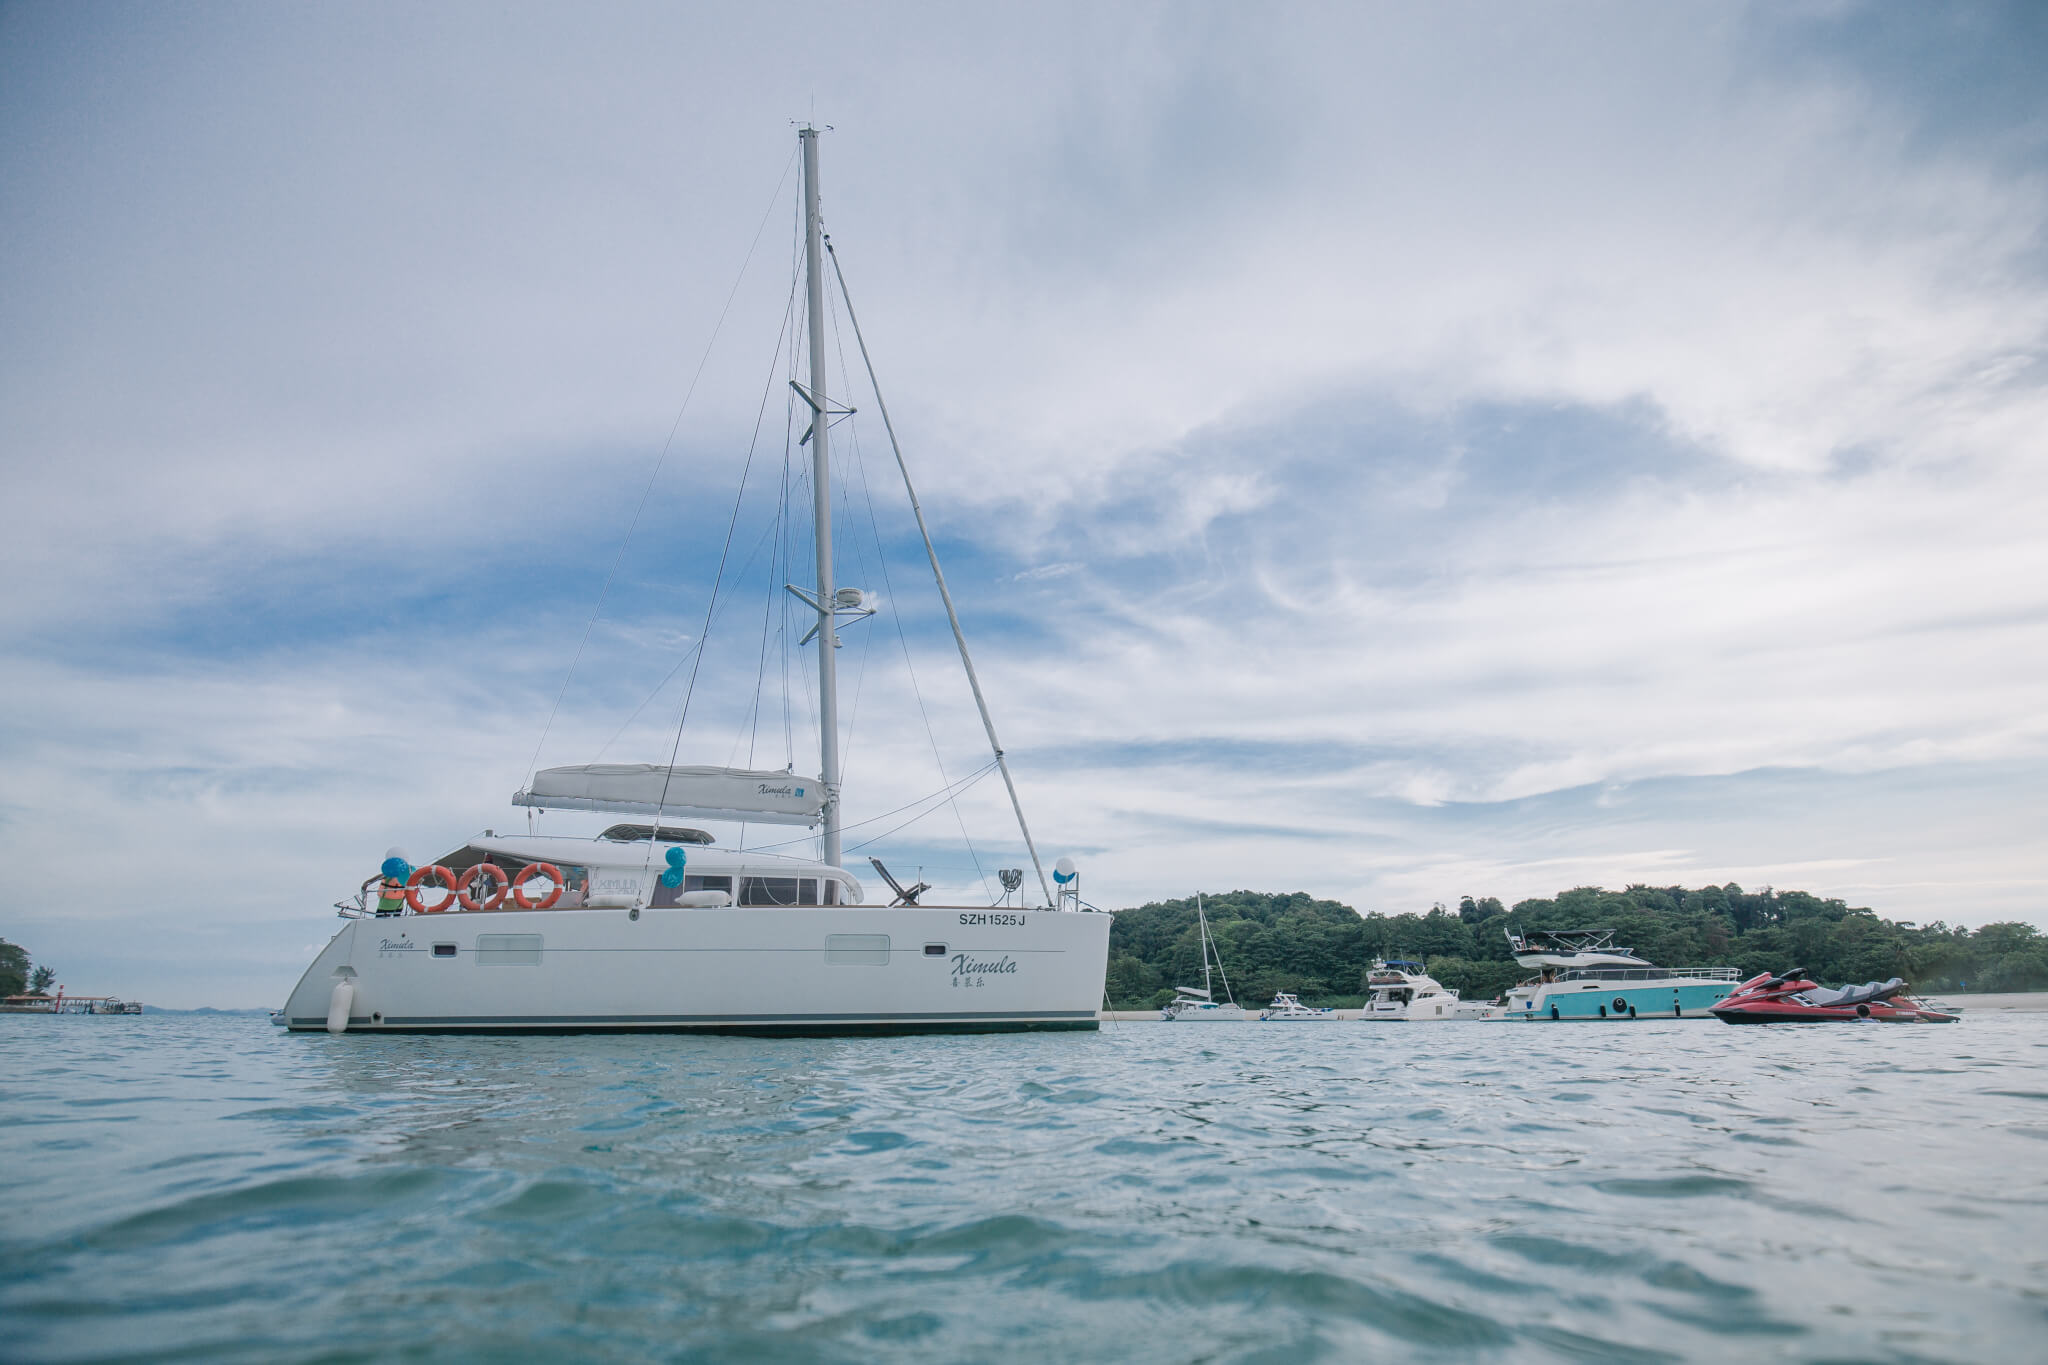 Book your Ximula Yacht Charter Singapore with YachtCharter.sg